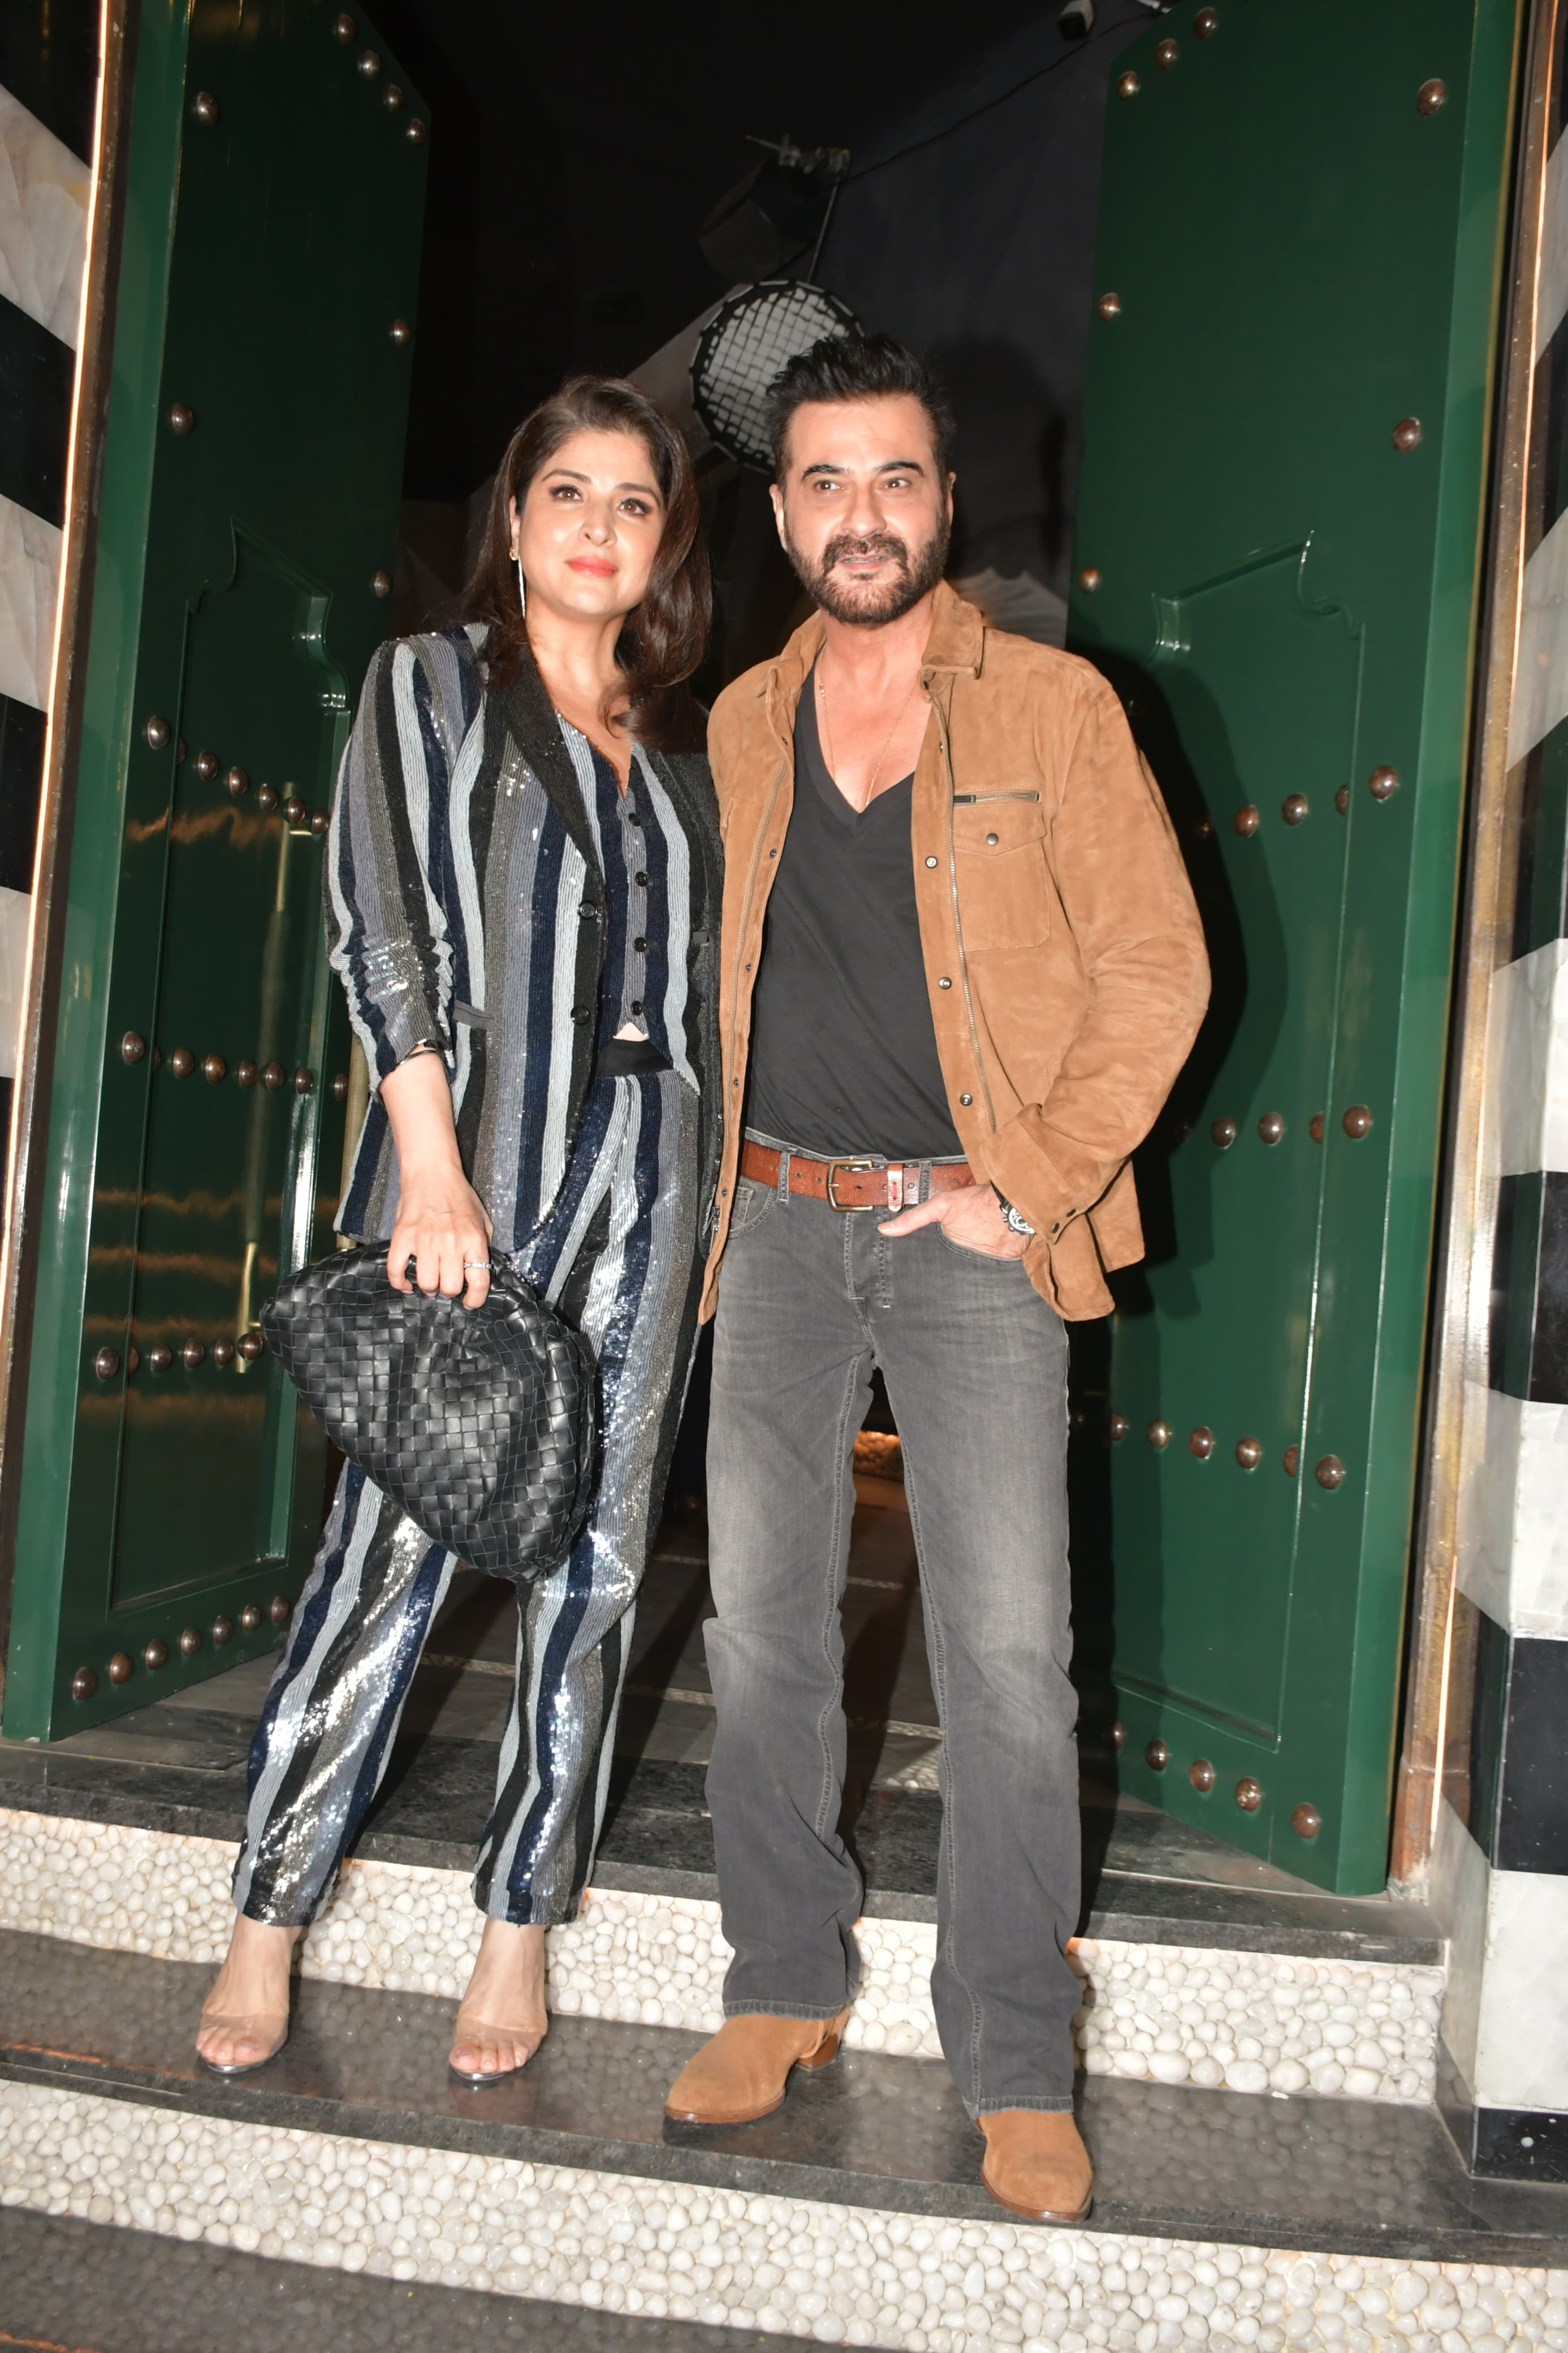 Maheep Kapoor aced in a stylish co-ord set and Sanjay Kapoor wore dashing and comfy outfits as they posed together for the paparazzi